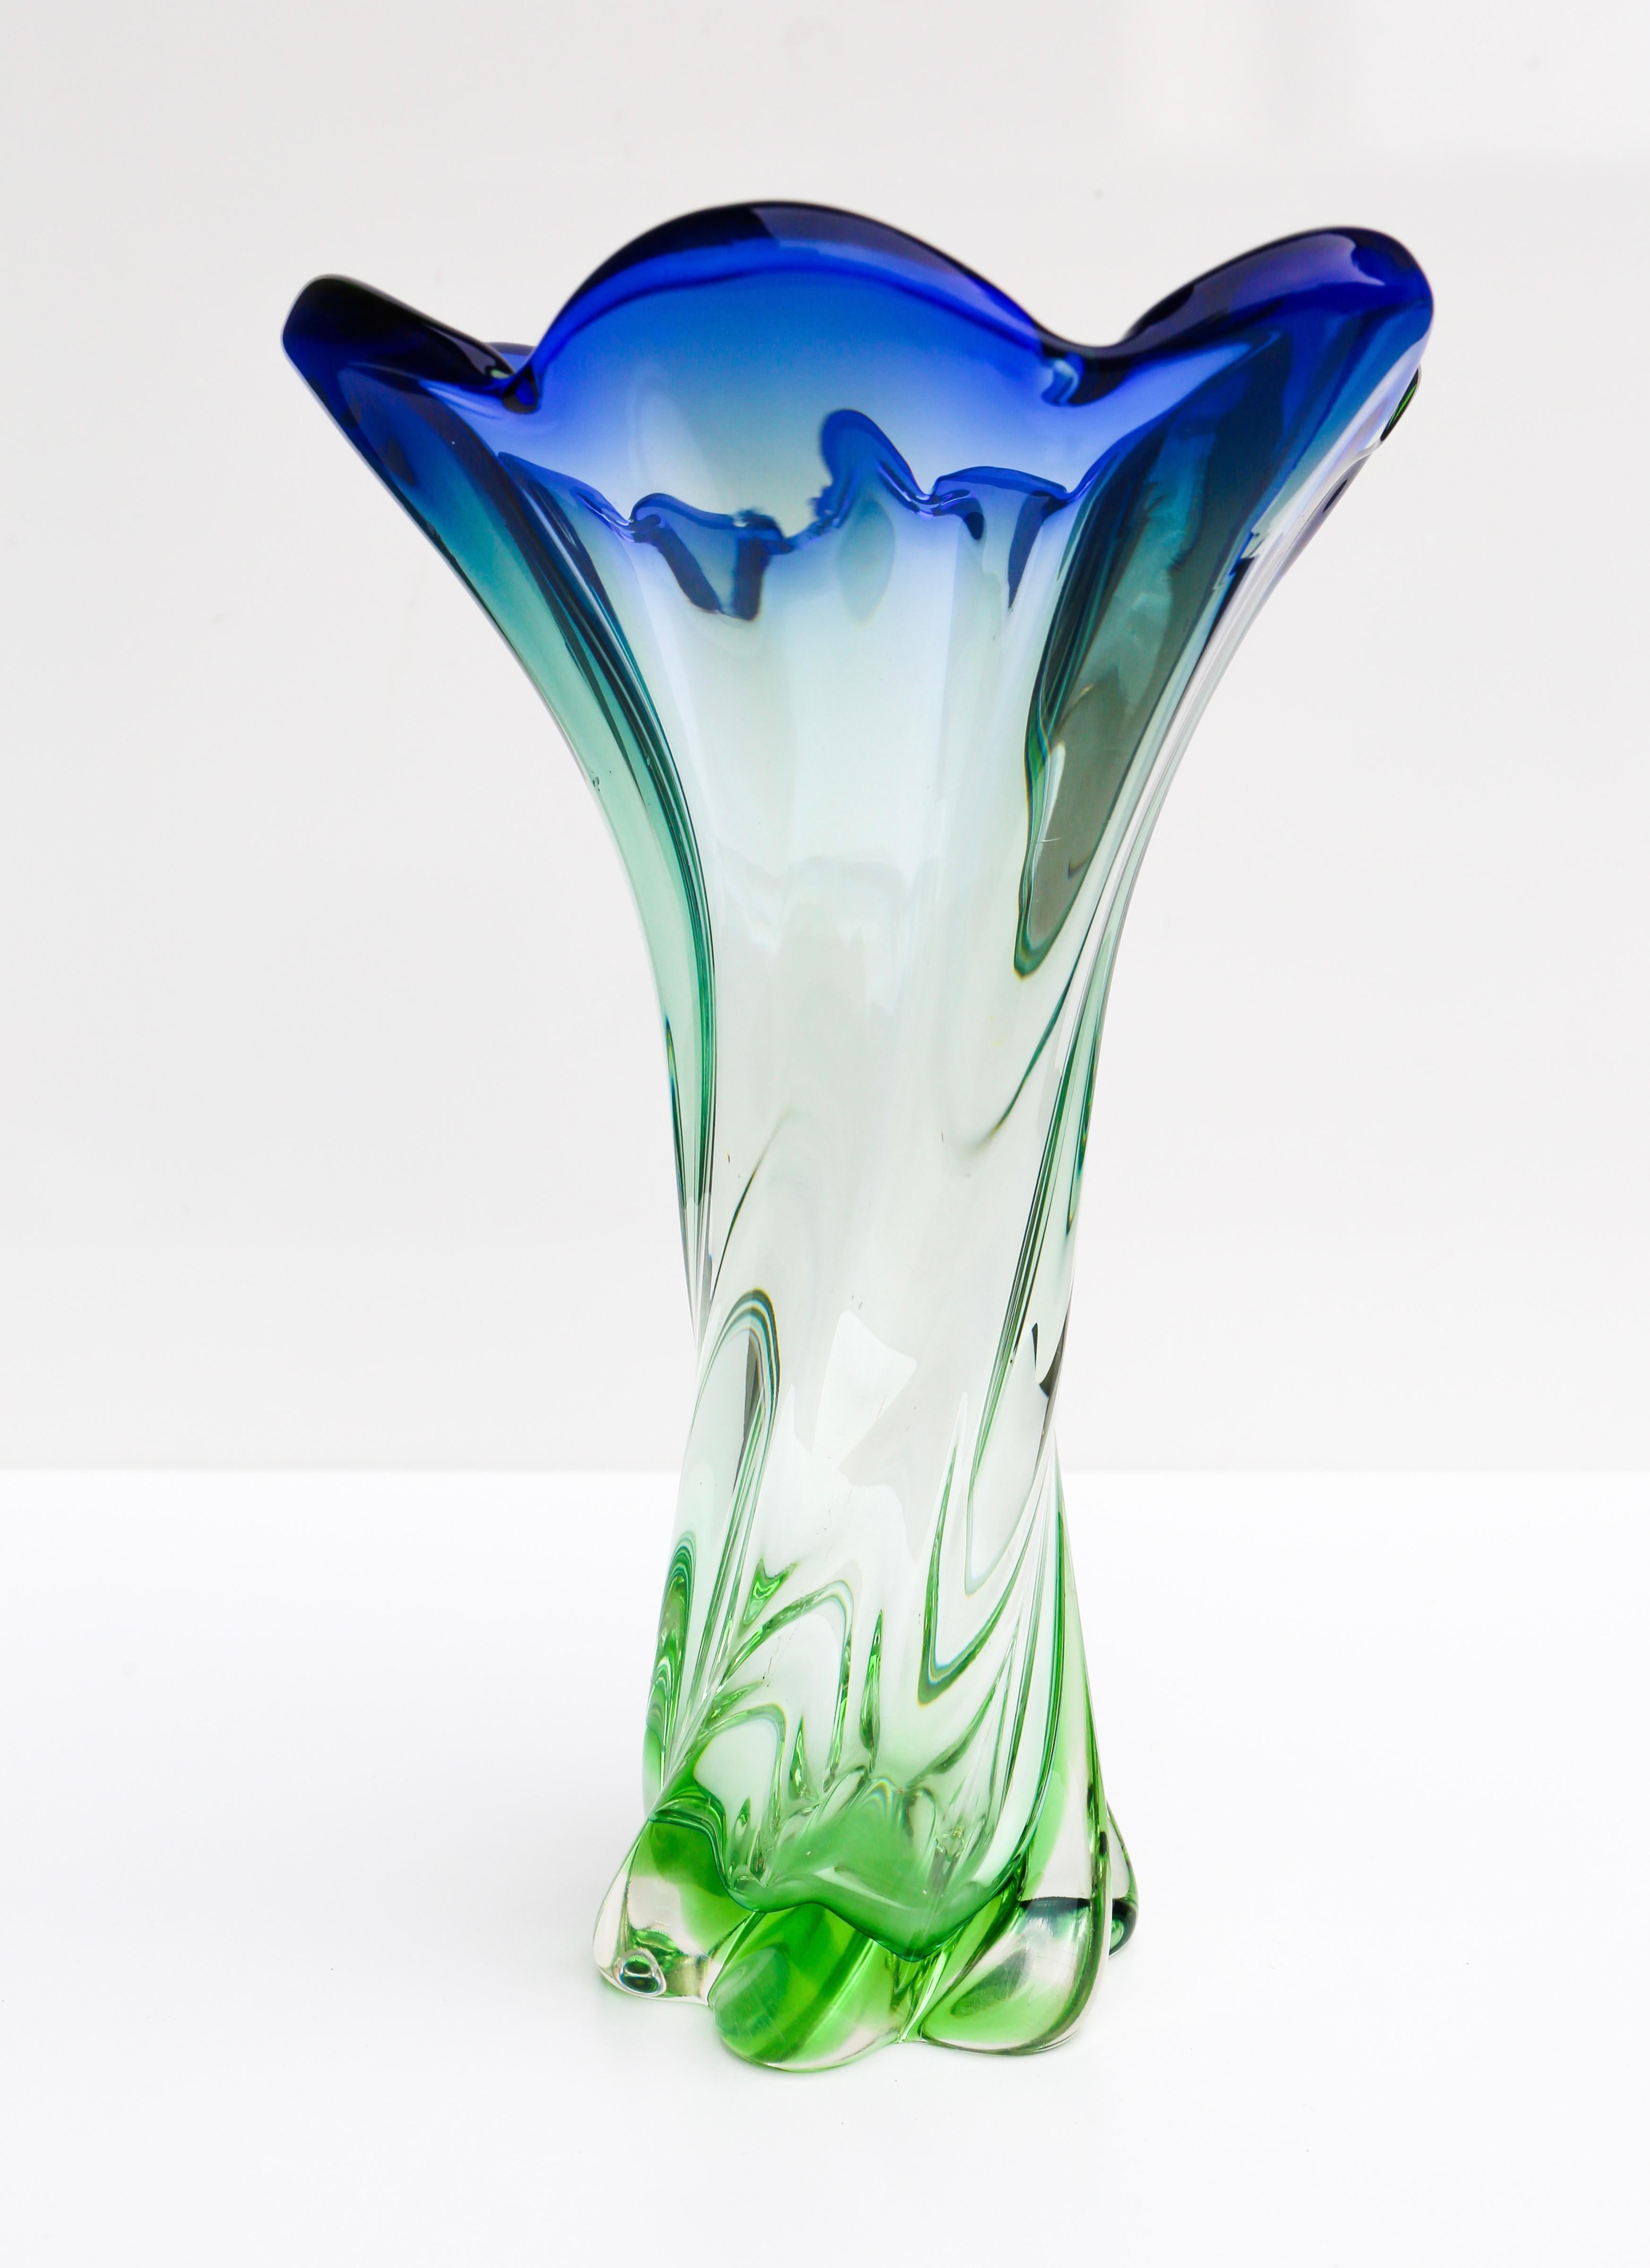 Large, striking Murano glass vase, made in the 1960s in Murano (Italy) and most likely designed by Flavio Poli. Height: 11.4